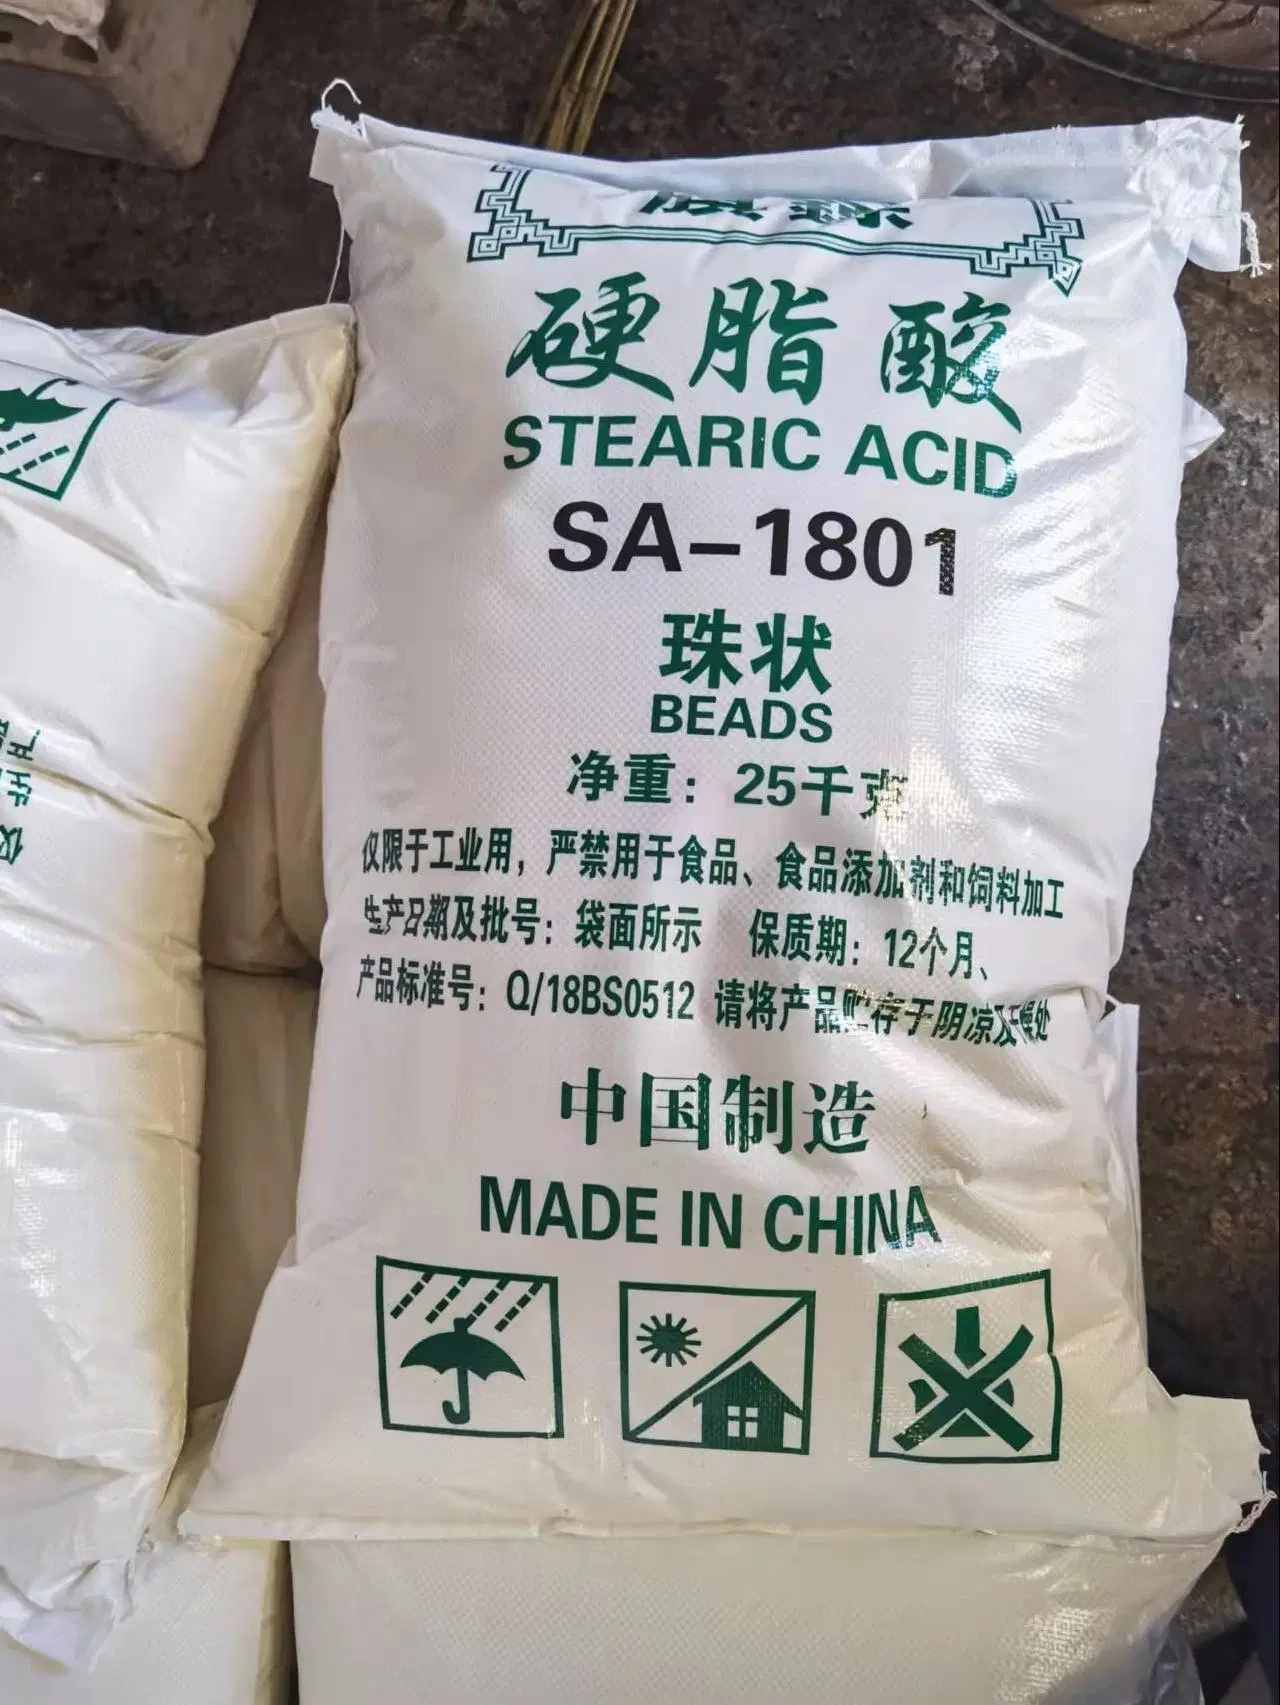 Basic Organic Chemicals White Powder Stearic Acid Triple Pressed for Sale Chemical